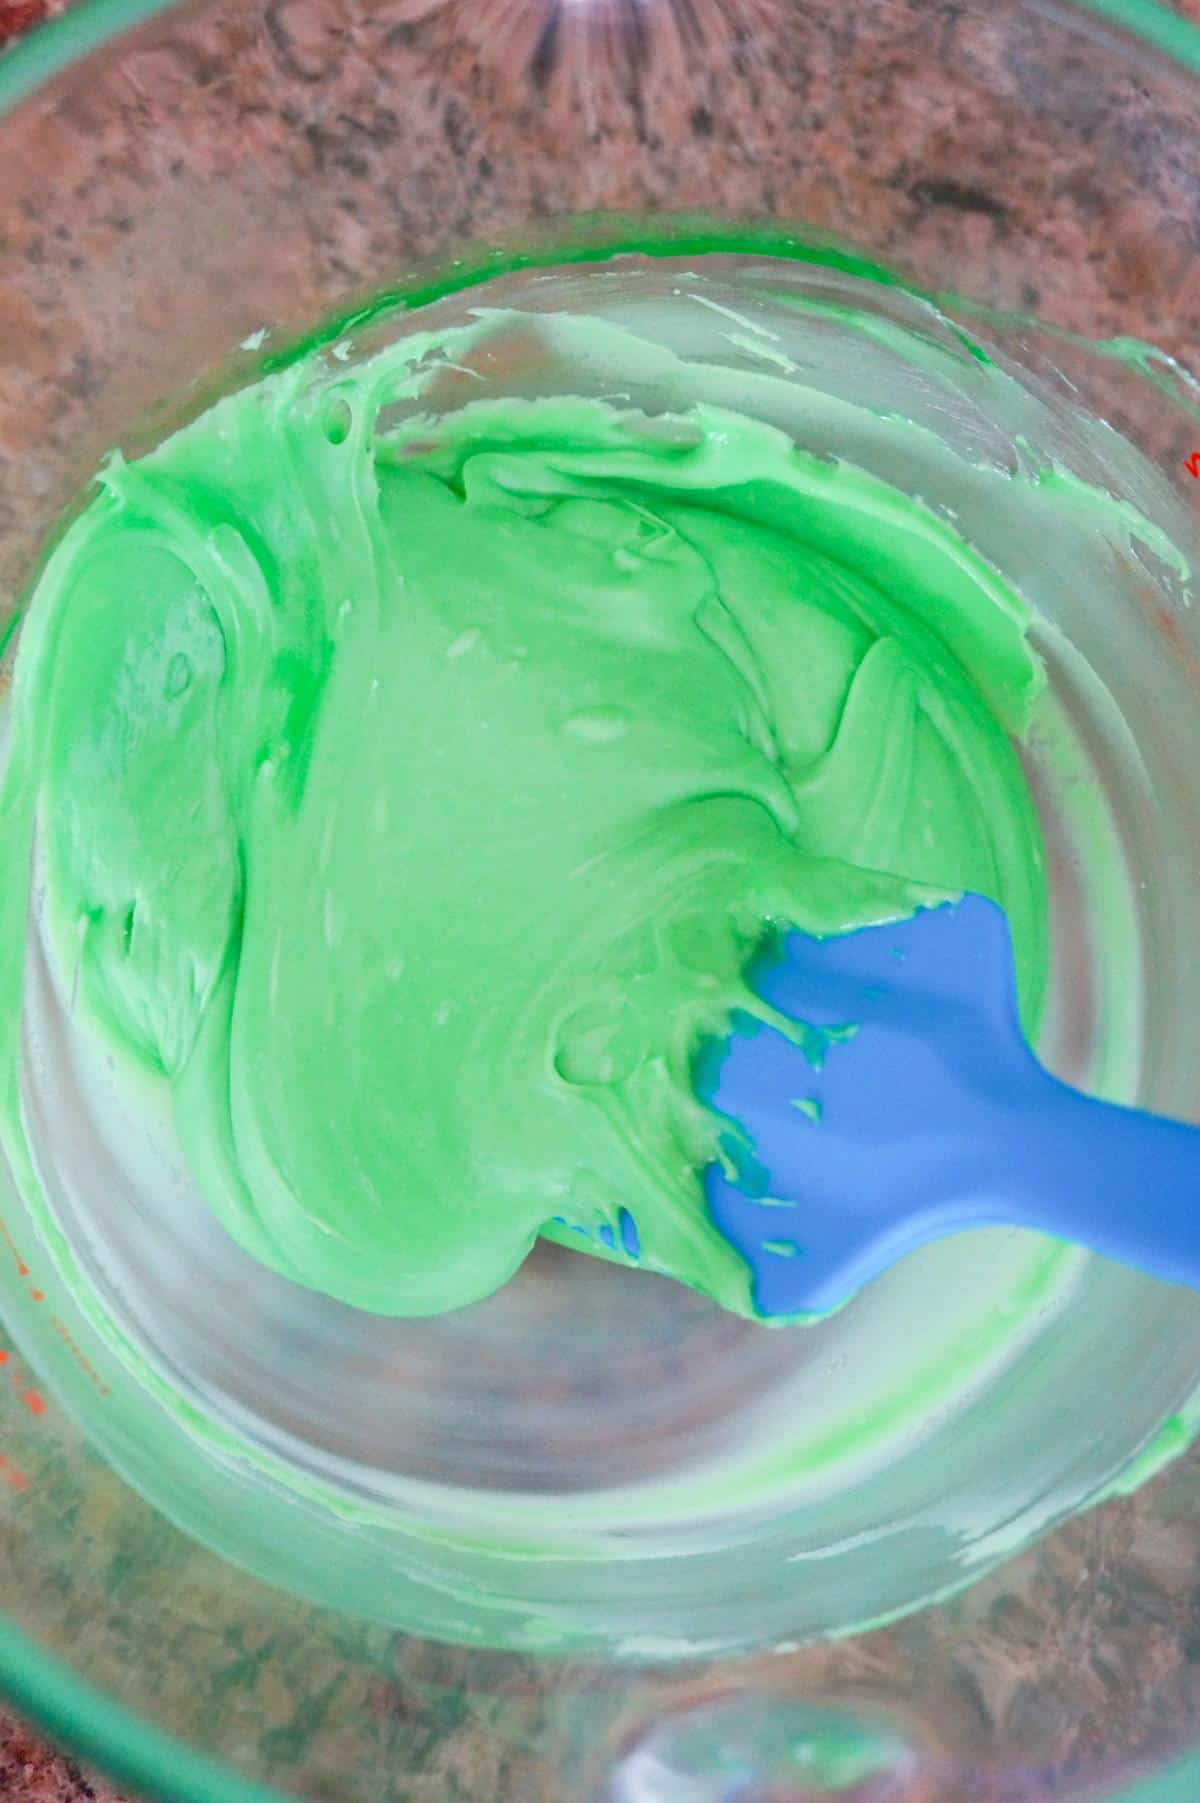 melted green chocolate mixture in a glass bowl